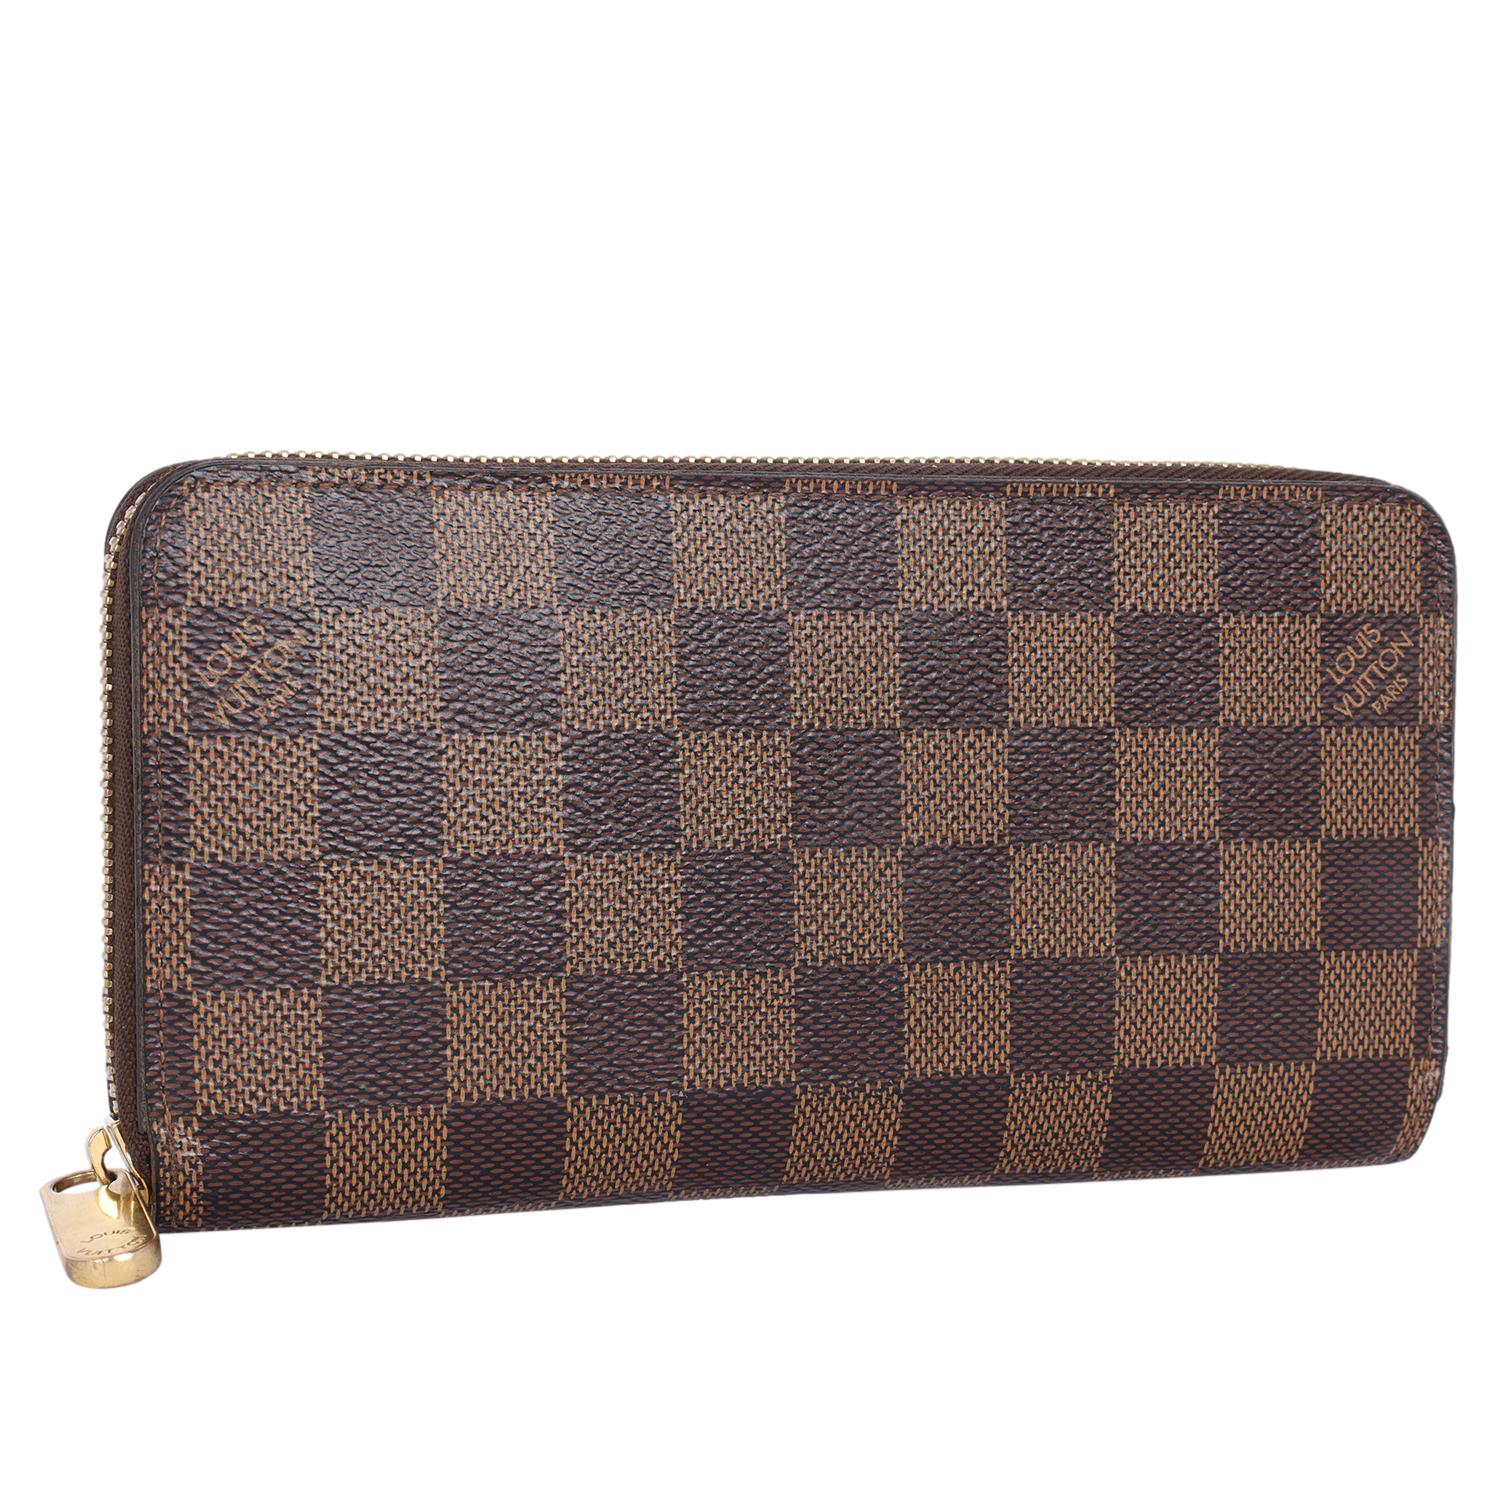 Authentic pre owned Louis Vuitton Damier Ebene Zippy Wallet with Rose Ballerine interior. The wallet features traditional damier ebene toile canvas. The wallet opens with a polished brass wrap-around zipper to a partitioned light pink cross-grain